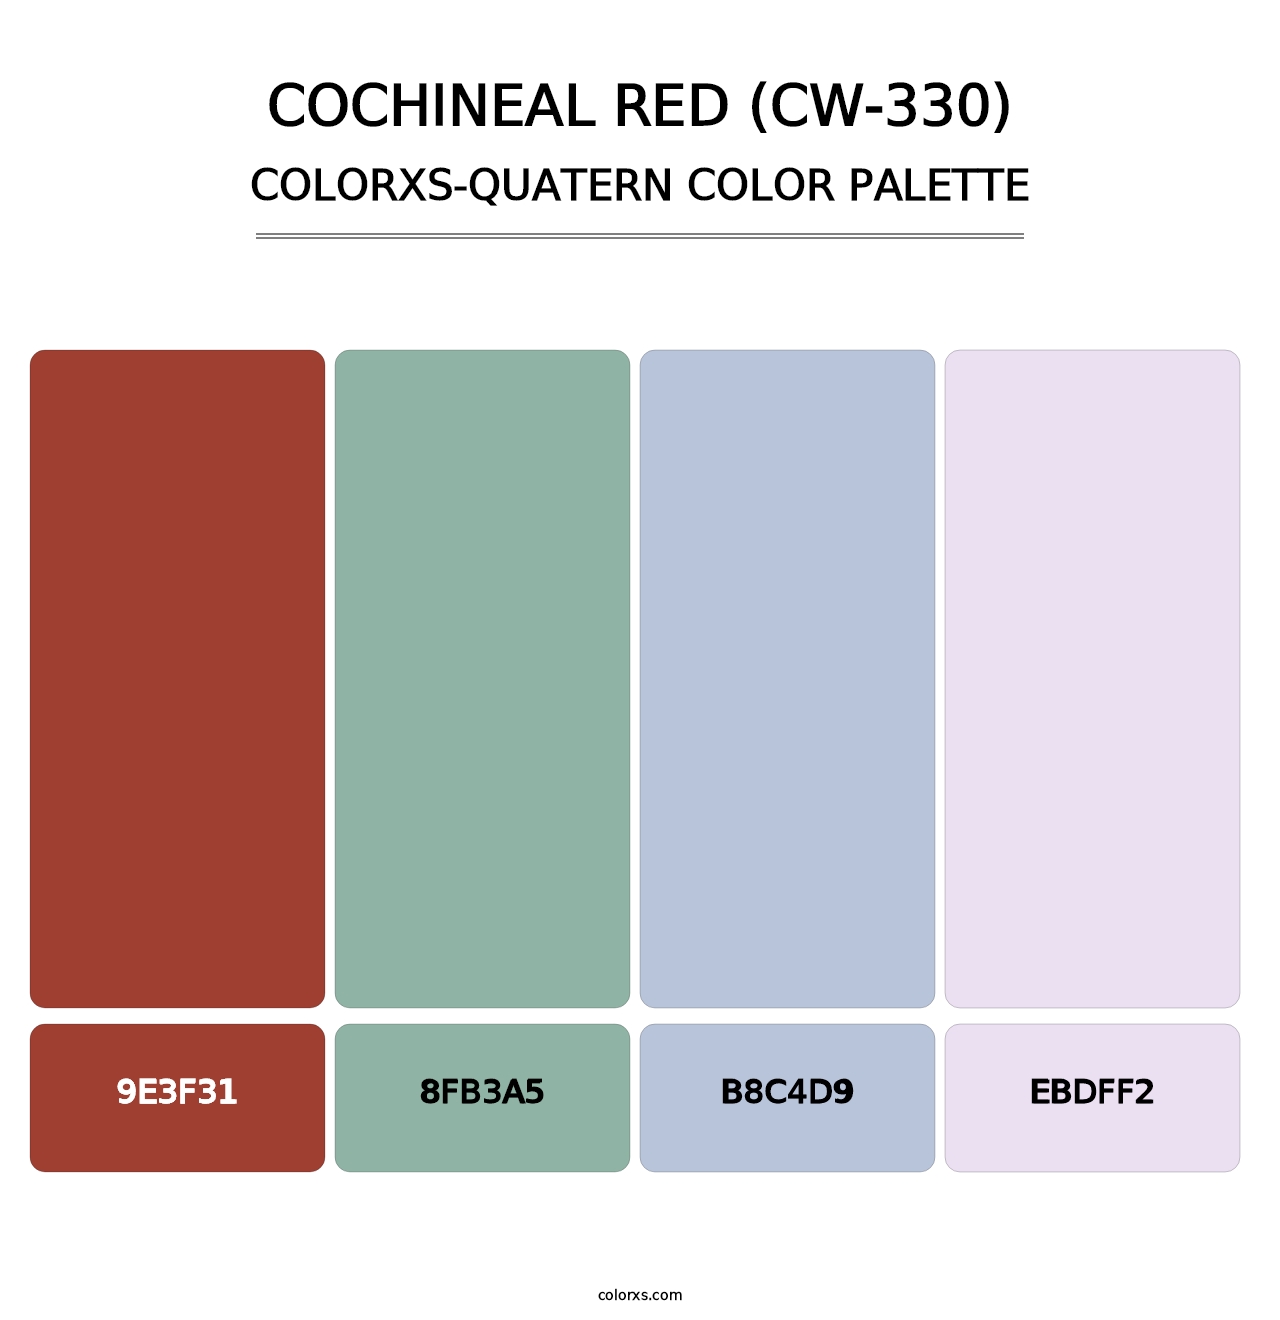 Cochineal Red (CW-330) - Colorxs Quatern Palette